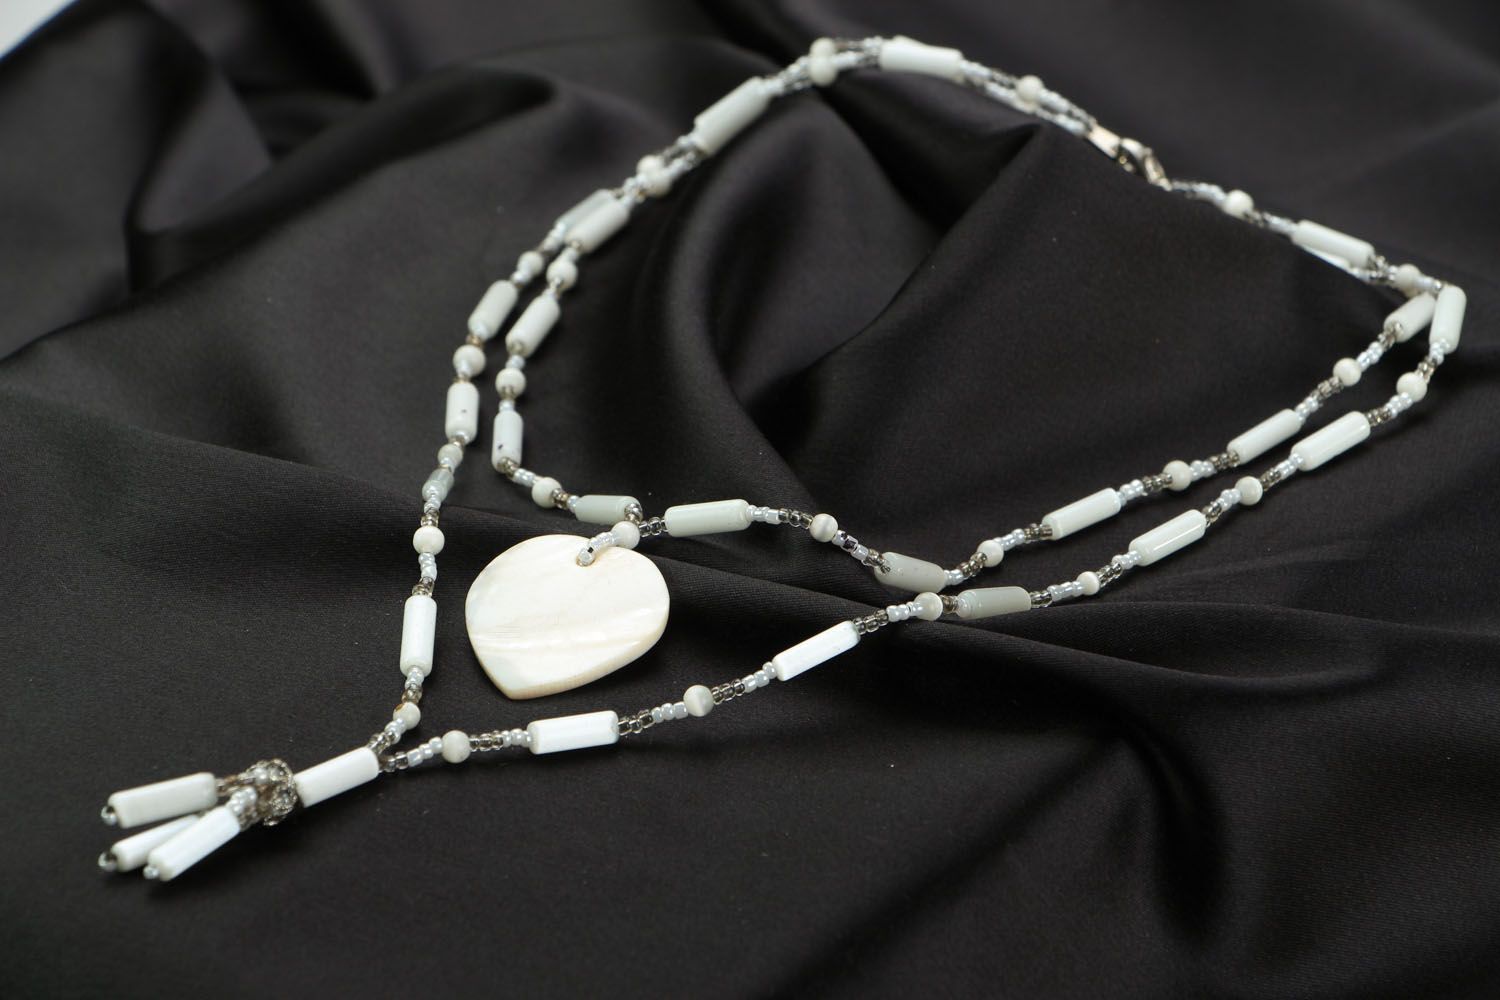 Necklace with white cat's eye stone photo 2